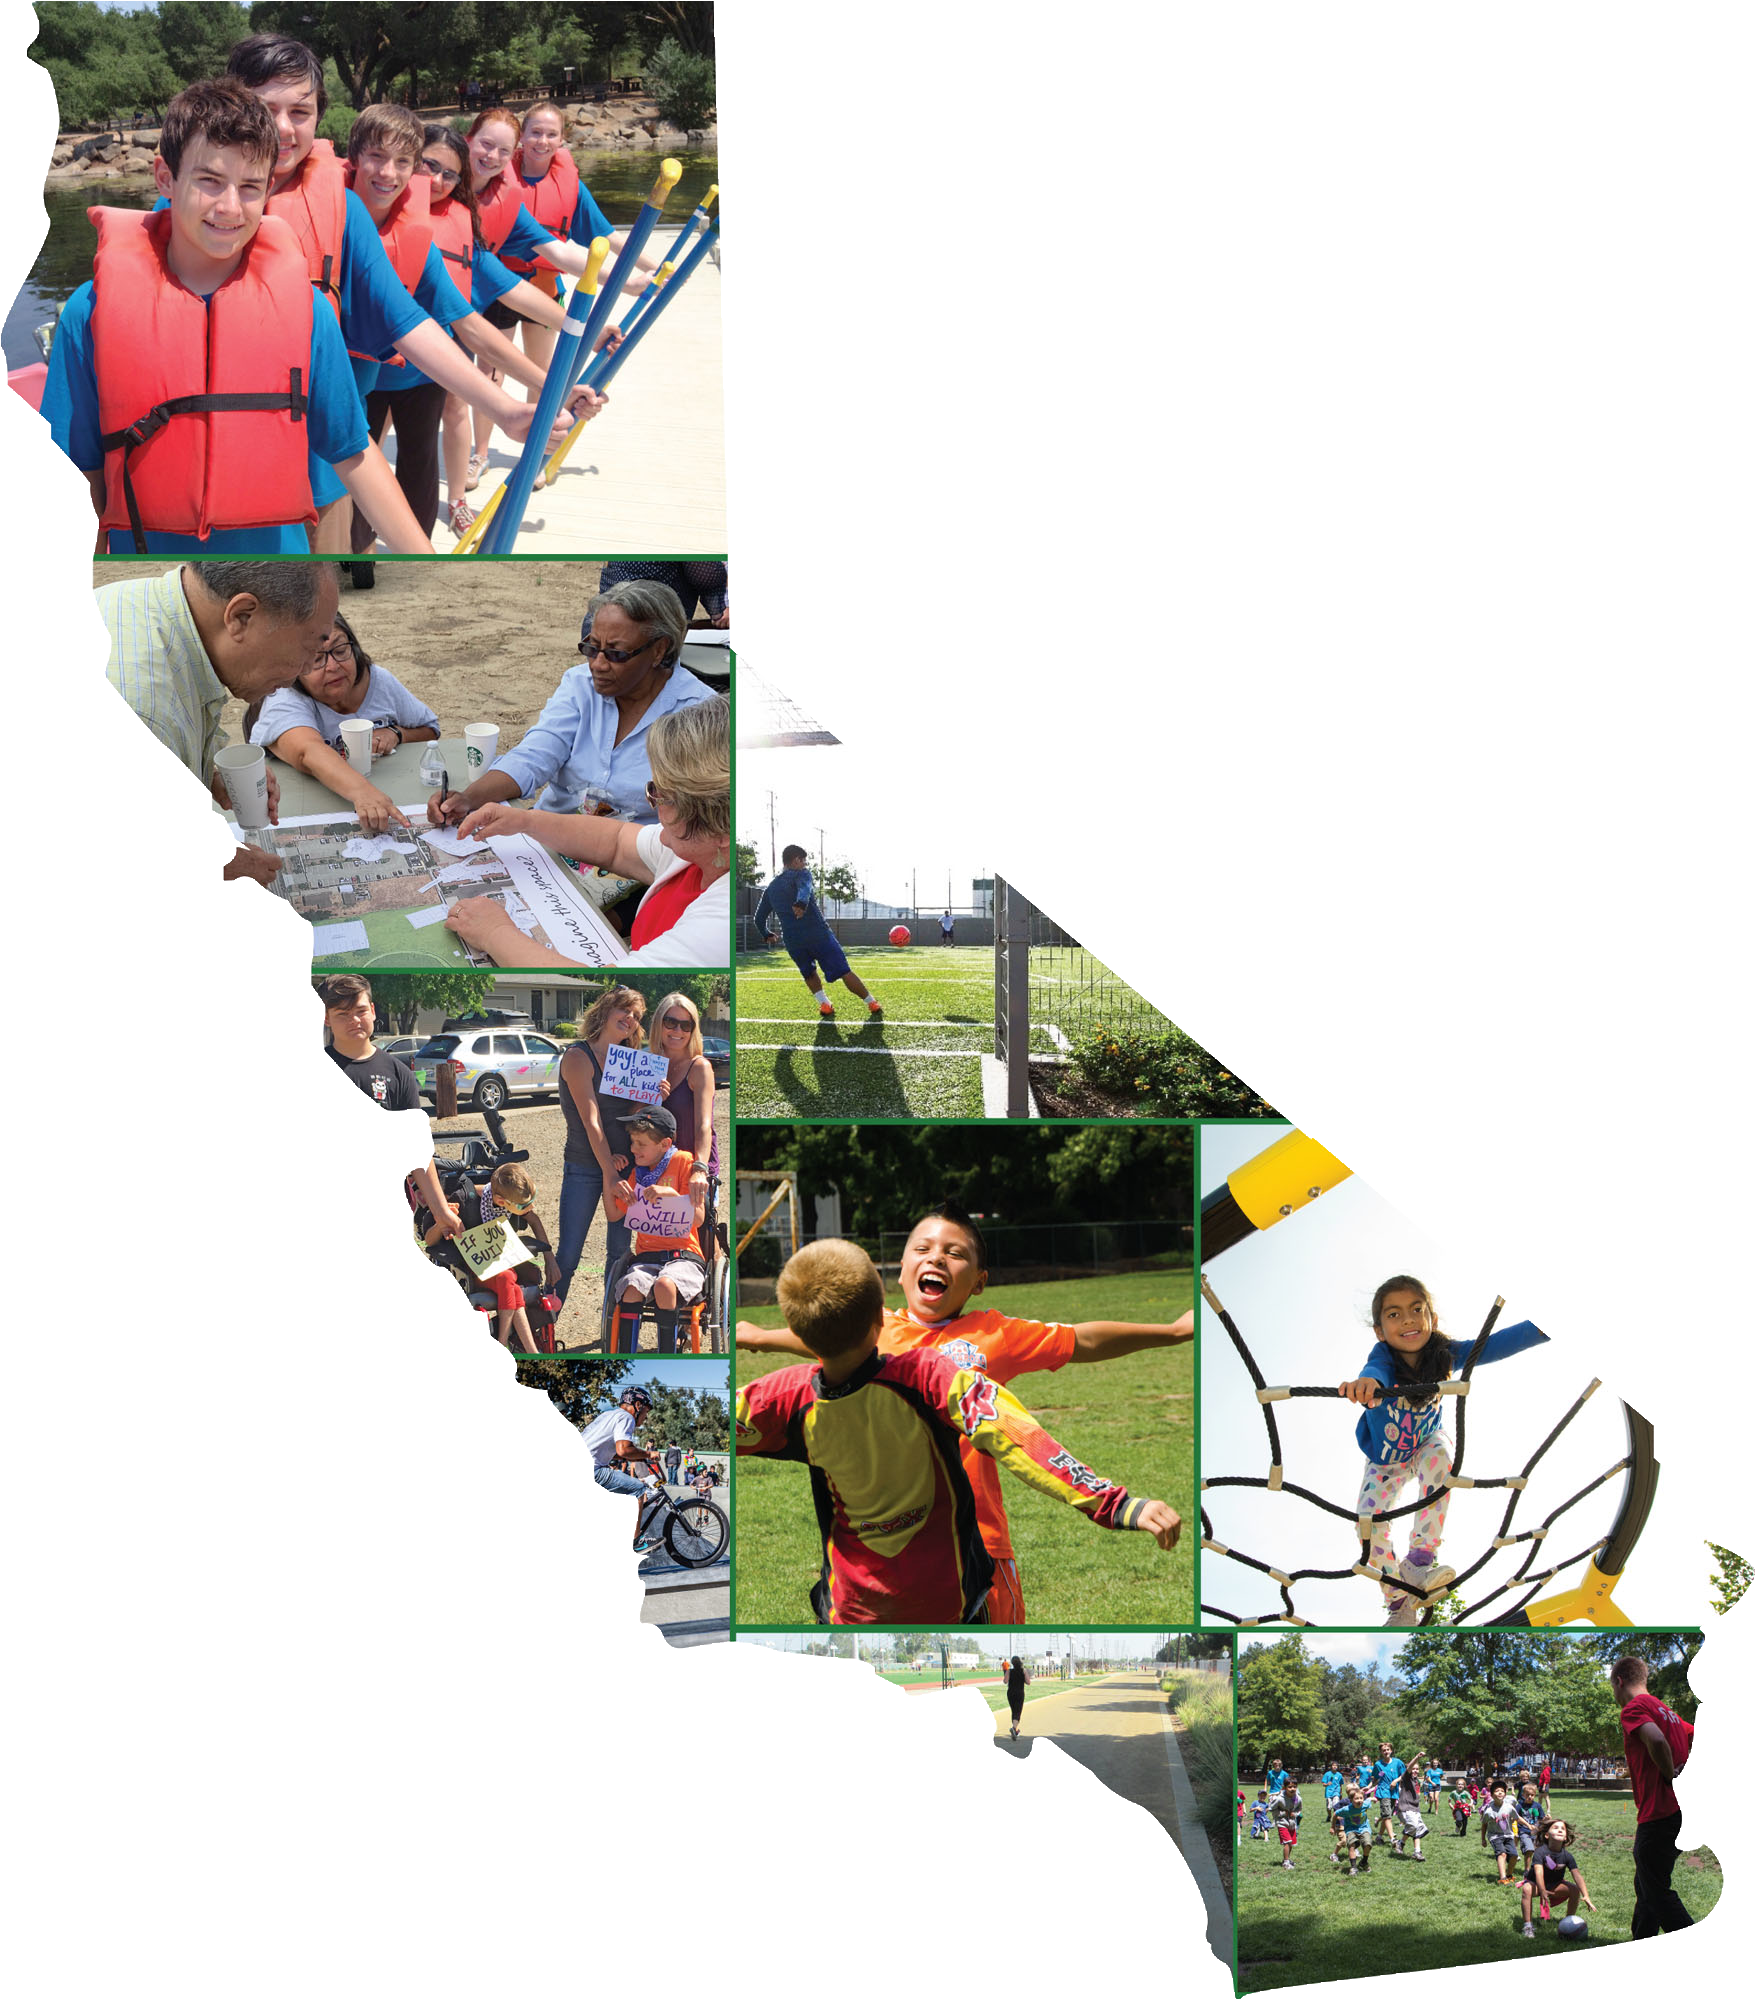 Collage in the shape of California of people rowing, kicking a ball and climbing a play structure